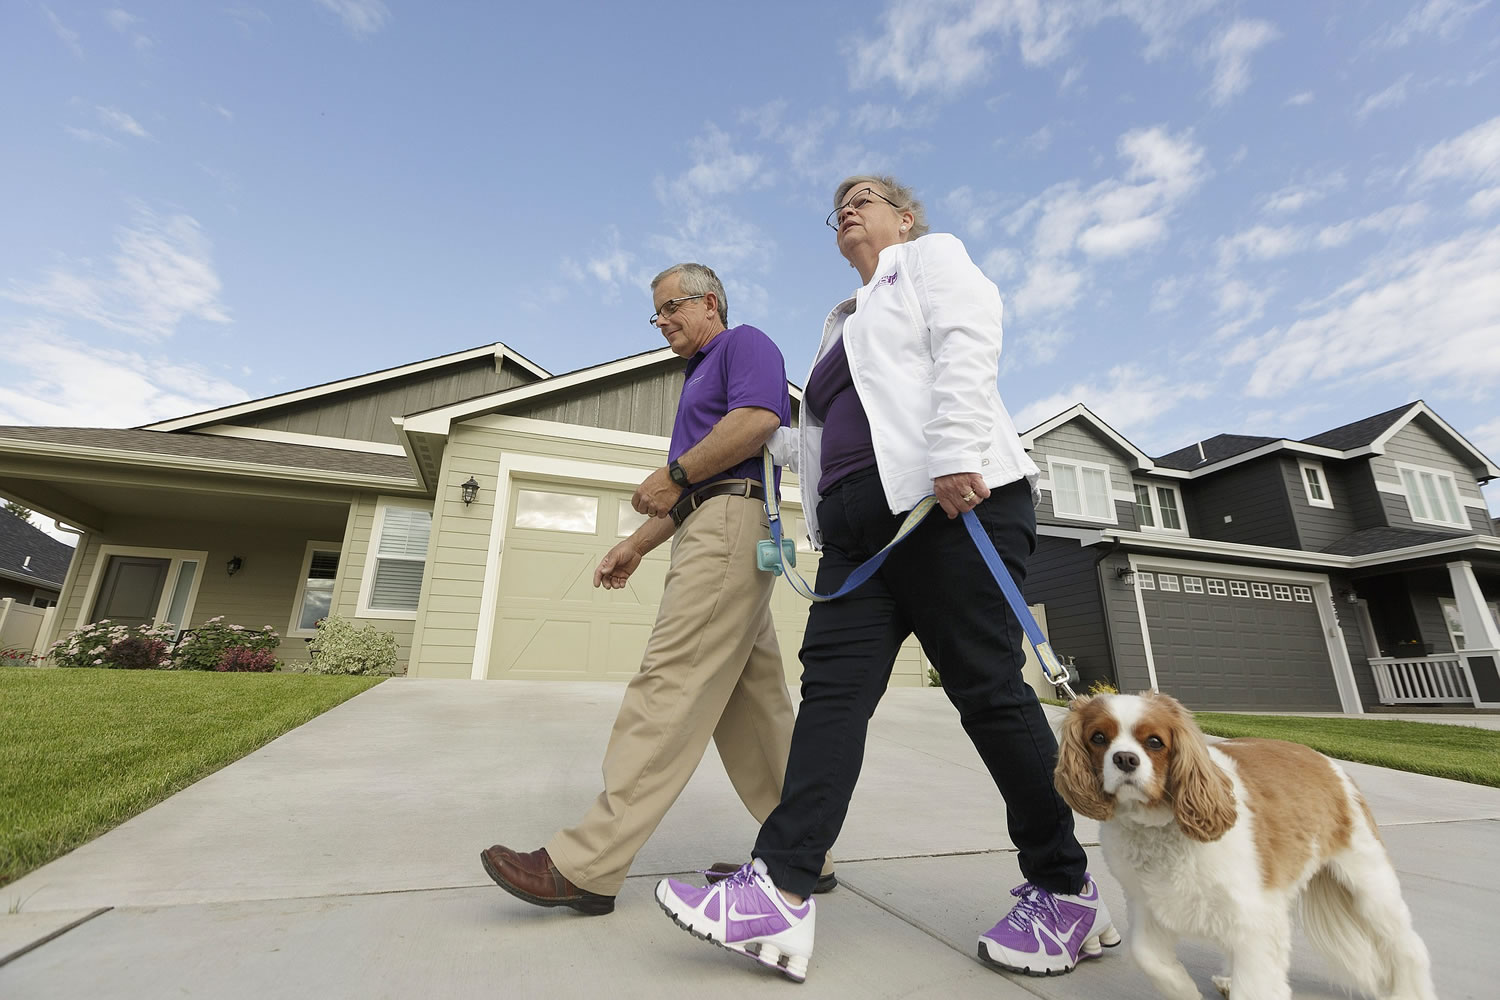 Amy Shives, right, and her husband, George, walk their cavalier King Charles spaniel Chester in their neighborhood June 3 in Spokane. Amy Shives was diagnosed with early onset Alzheimer's disease in 2011 and has since been involved with the Alzheimer's Association.